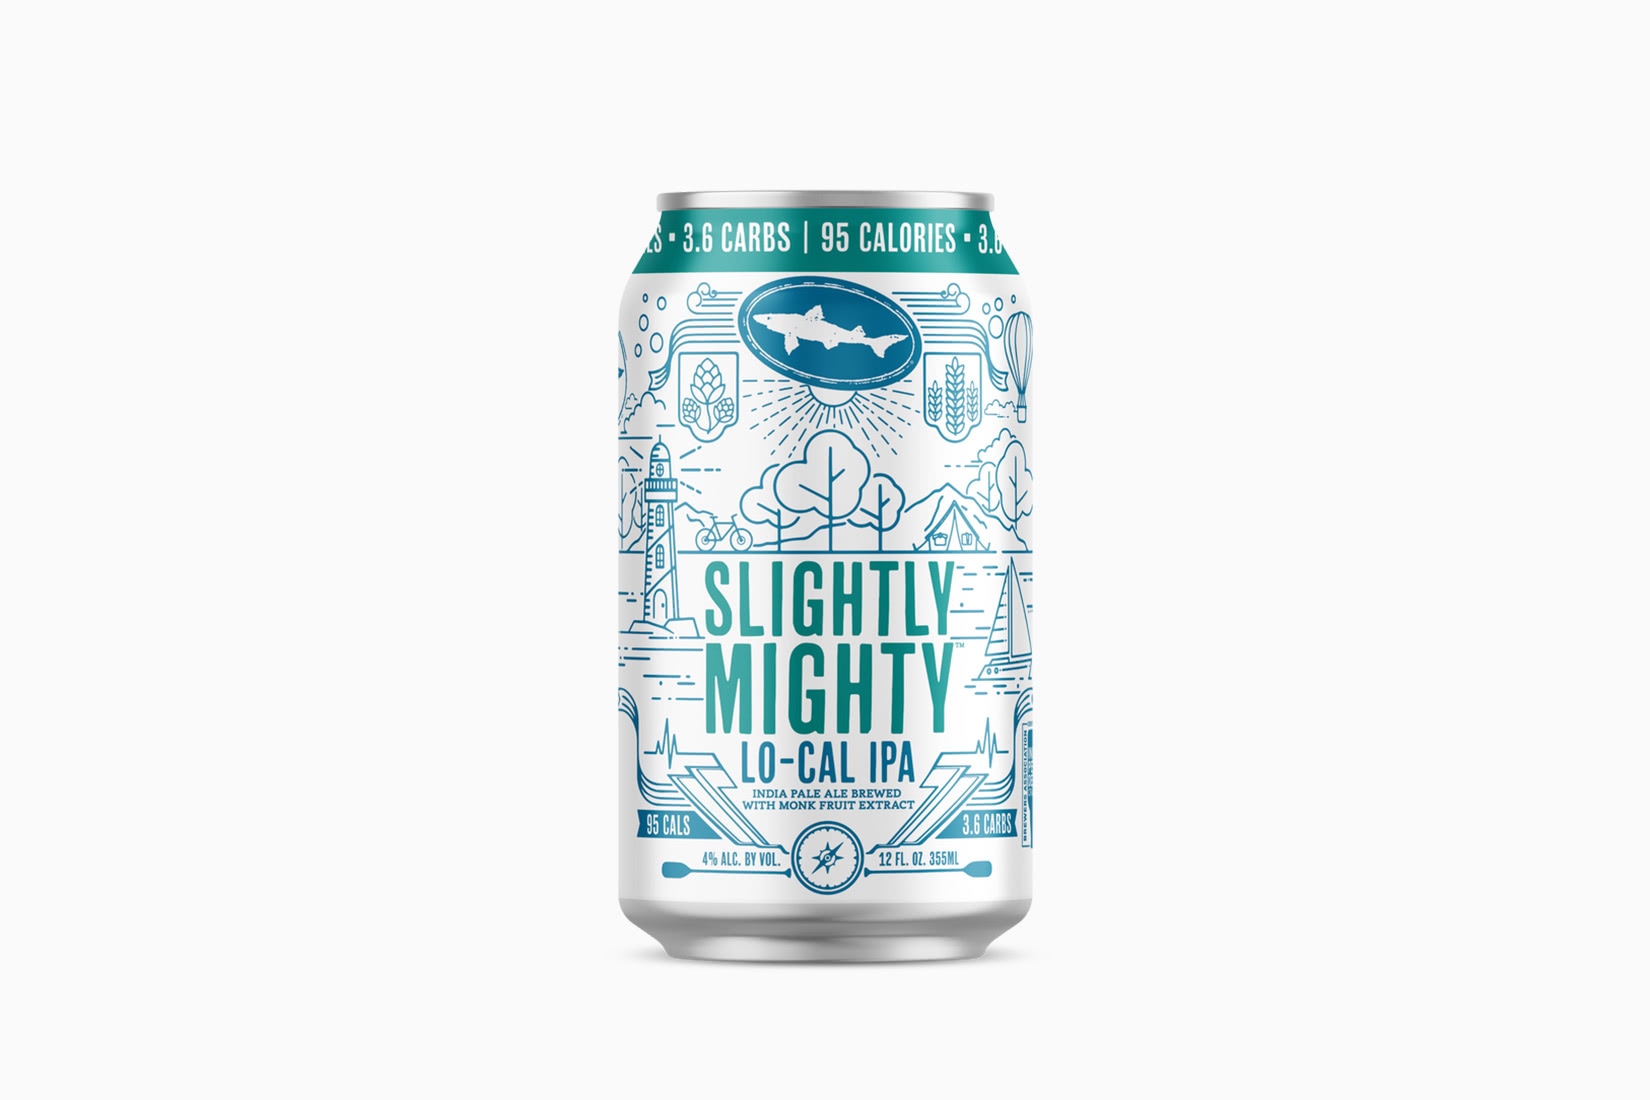 meilleures marques de bière dogfish head slightly mighty - Luxe Digital